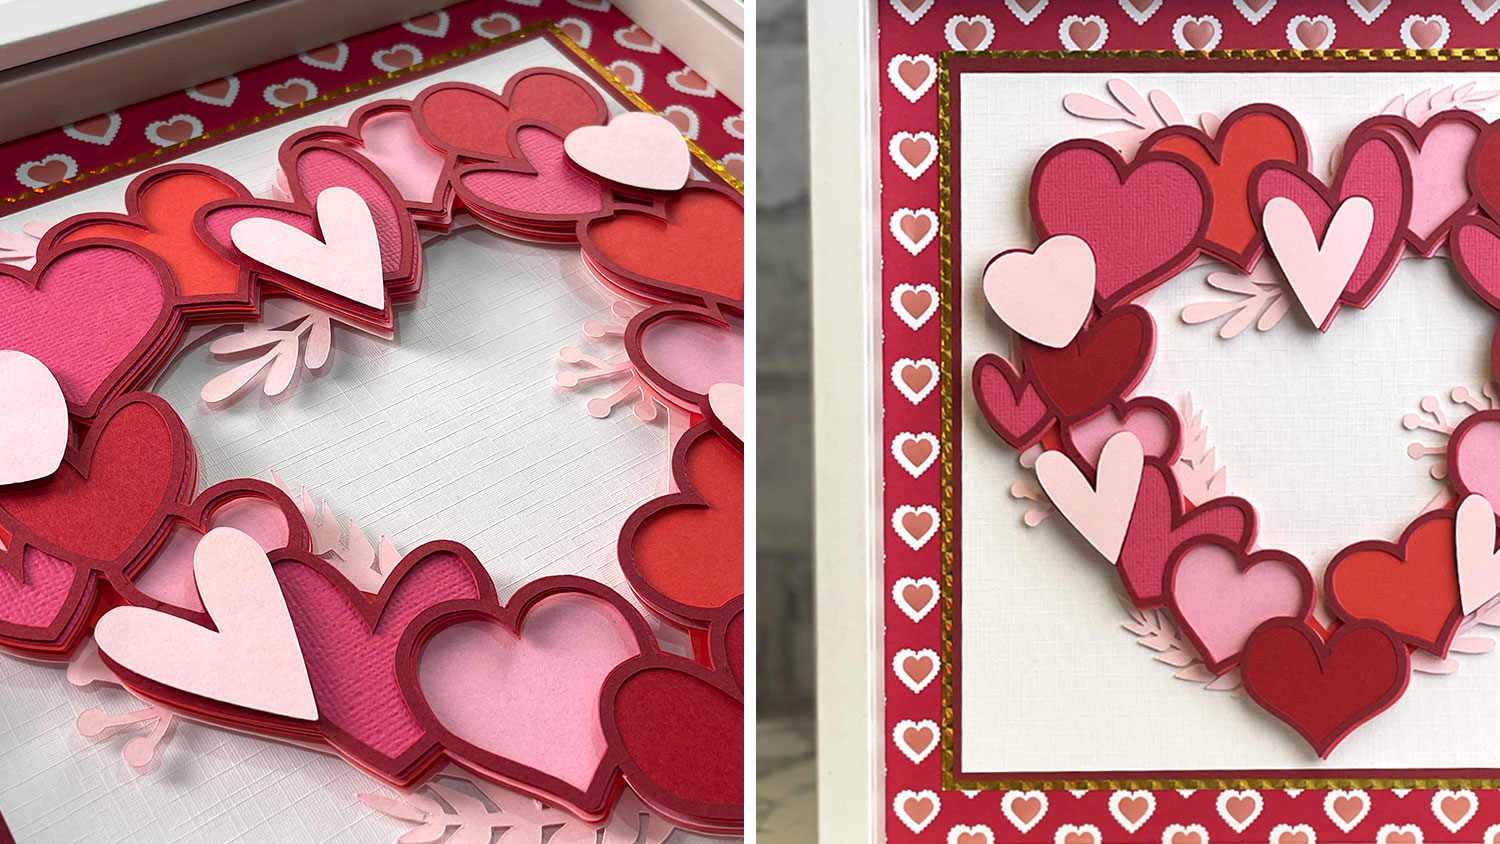 Beautiful Love Heart Paper Wreath for Valentine's Day